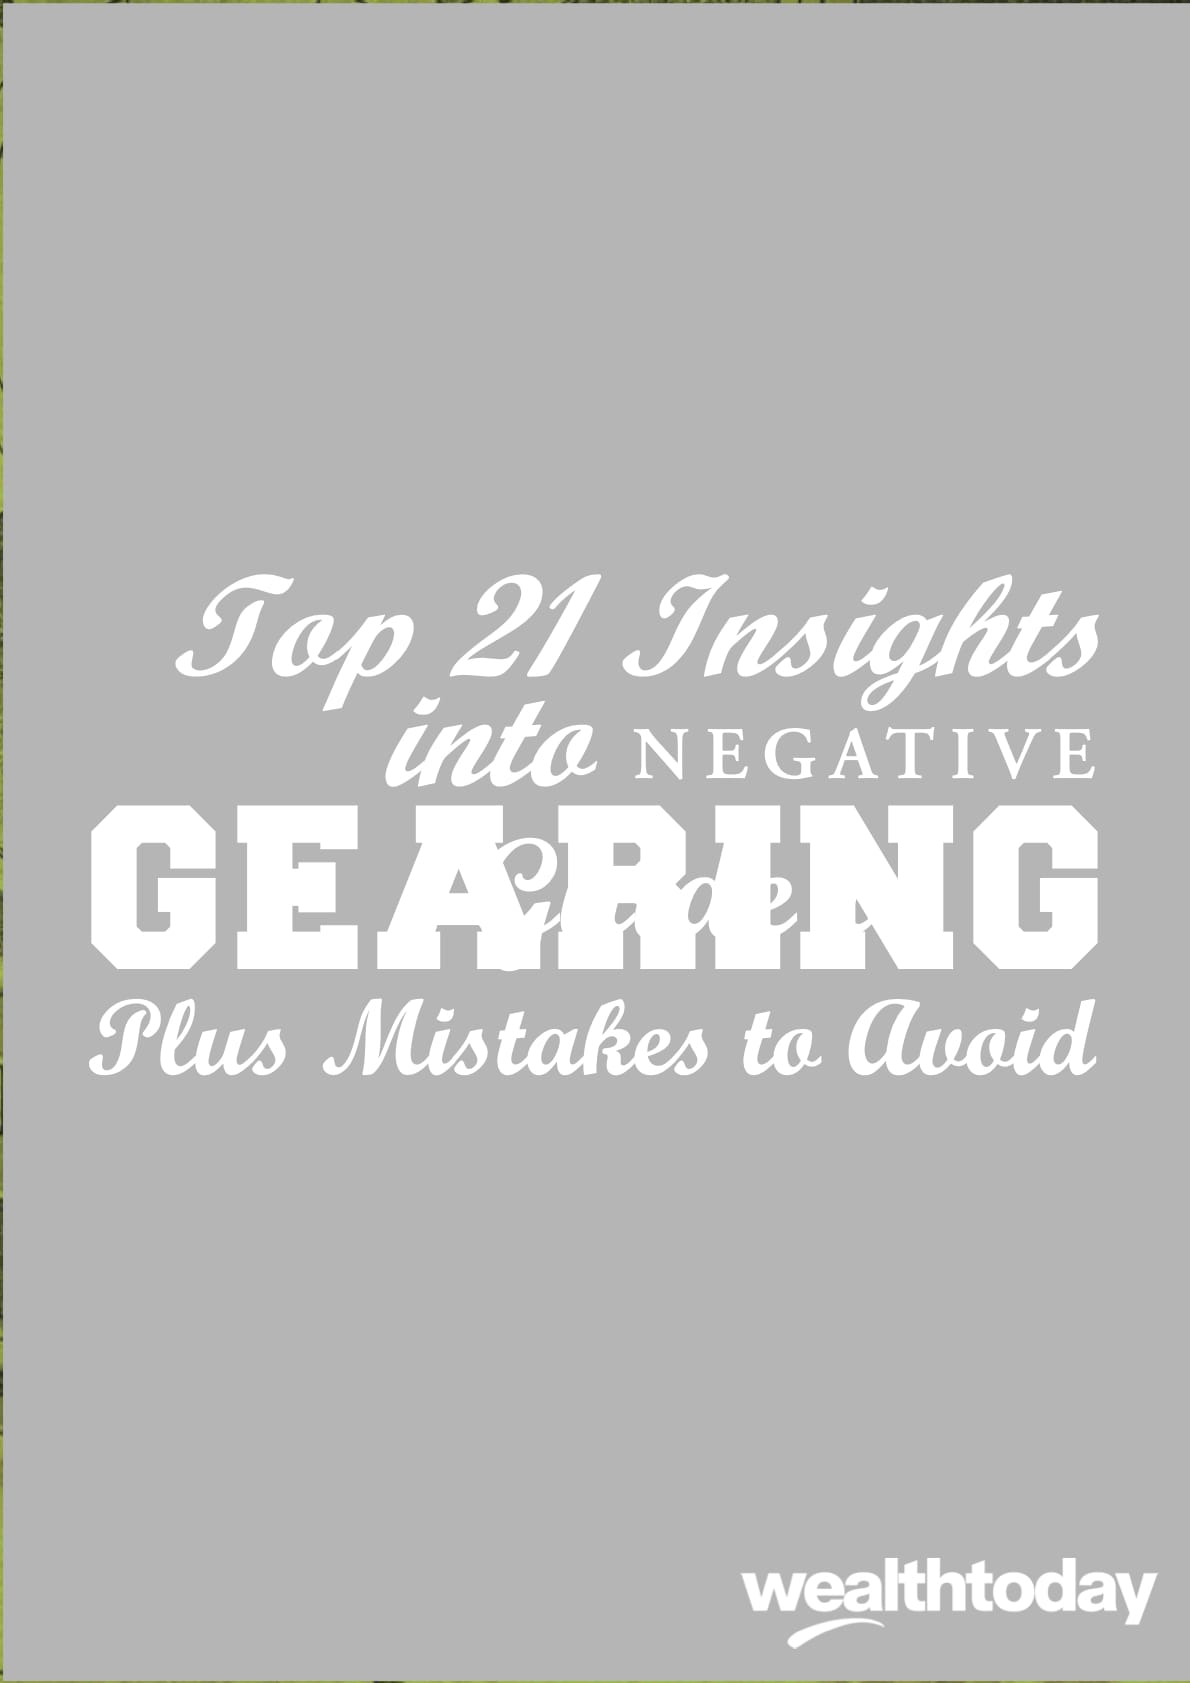 Top-21-Insights-into-Negative-Gearing-Plus-Mistakes-to-Avoid-WT-Form-201810